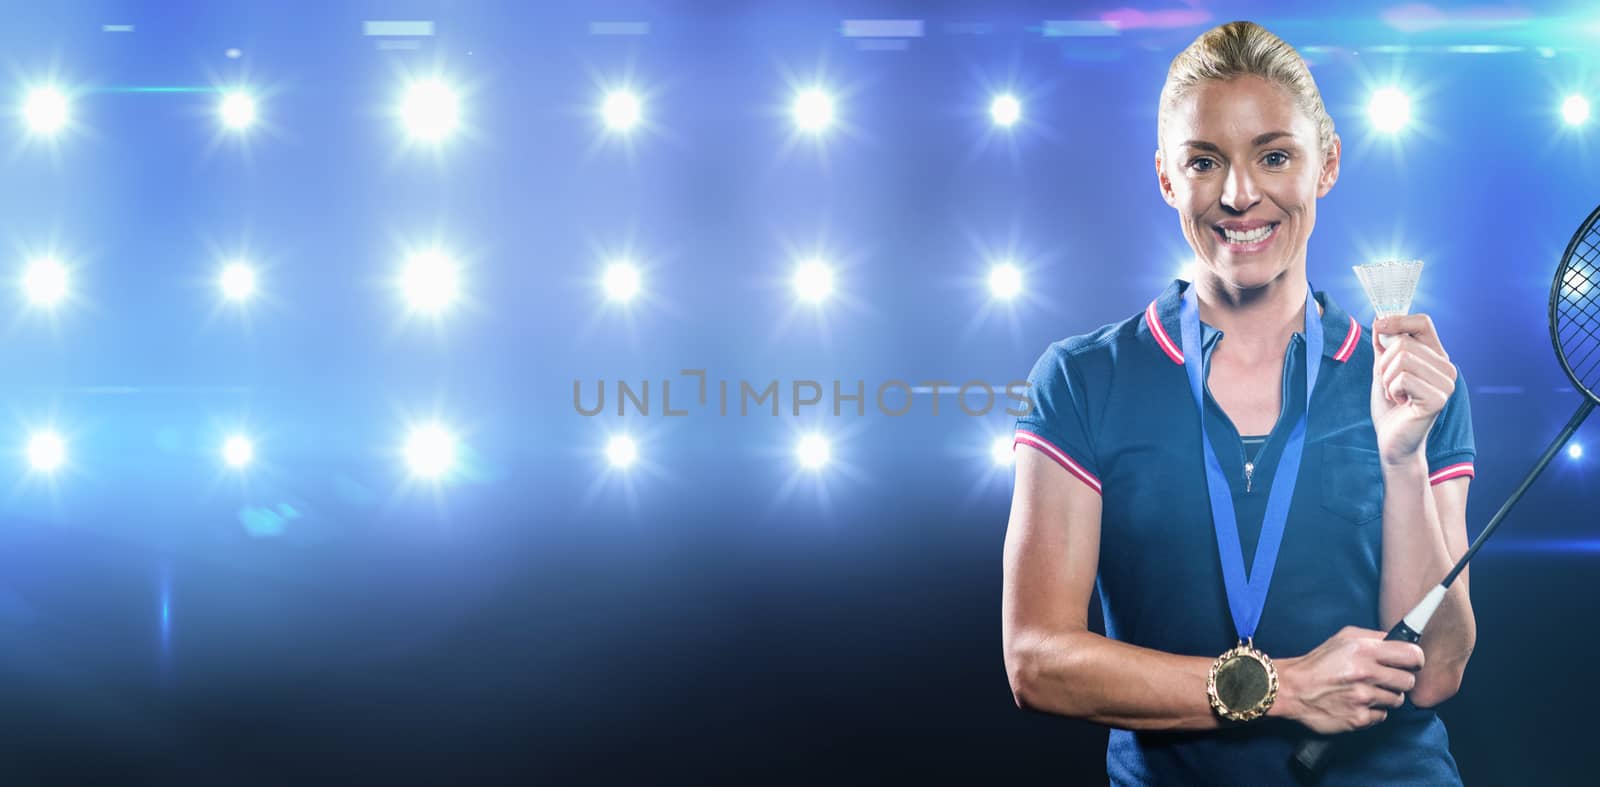 Badminton player posing with gold medal around her neck against composite image of blue spotlight